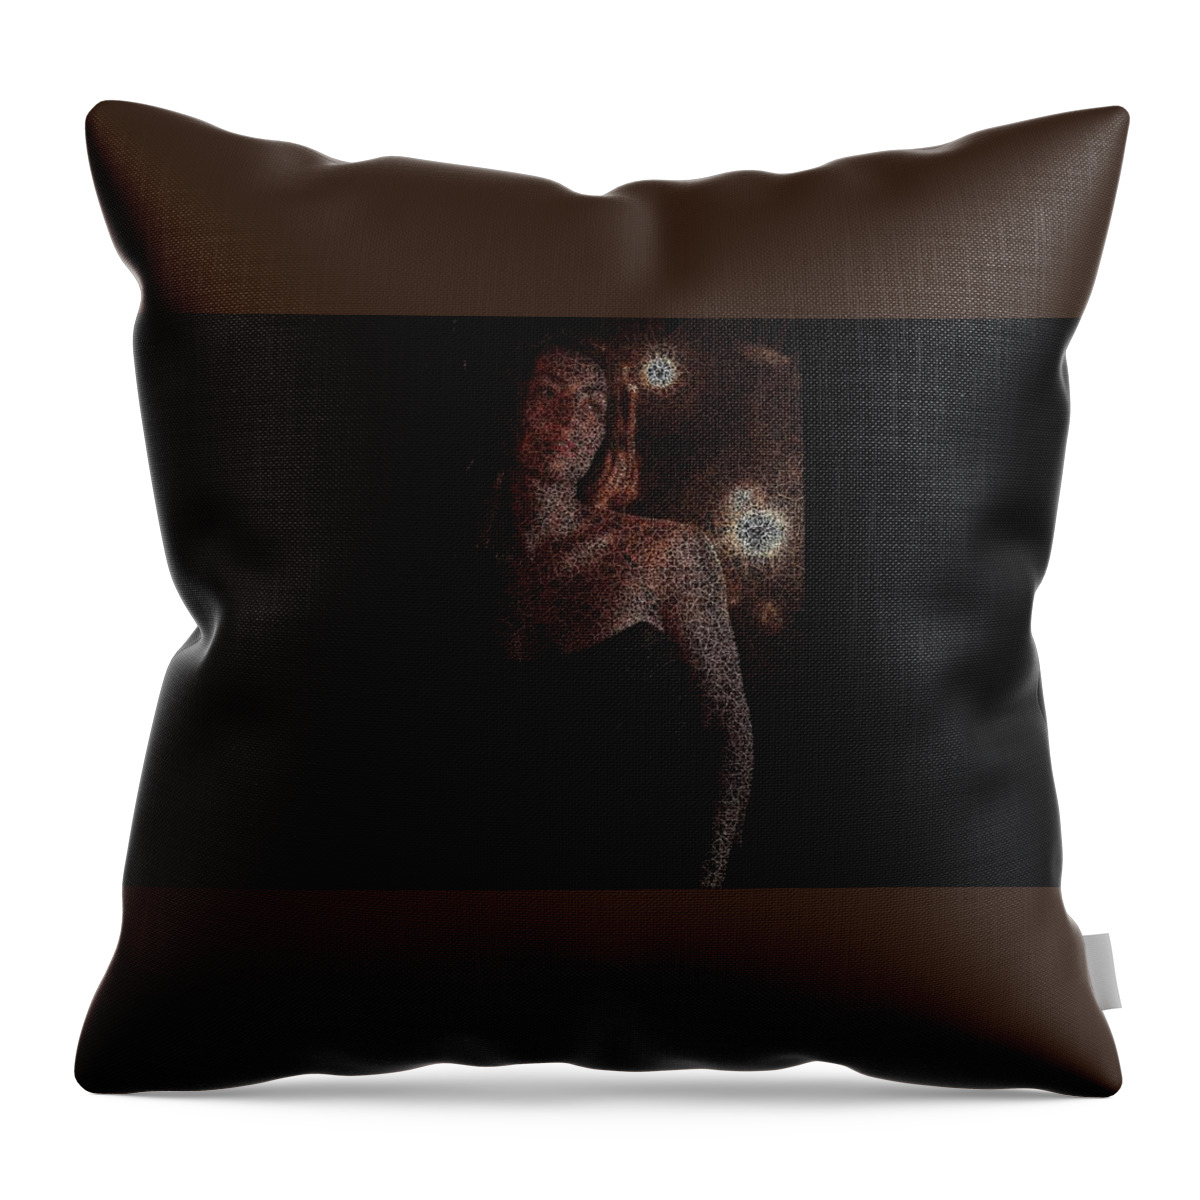 Vorotrans Throw Pillow featuring the digital art Two Suns by Stephane Poirier